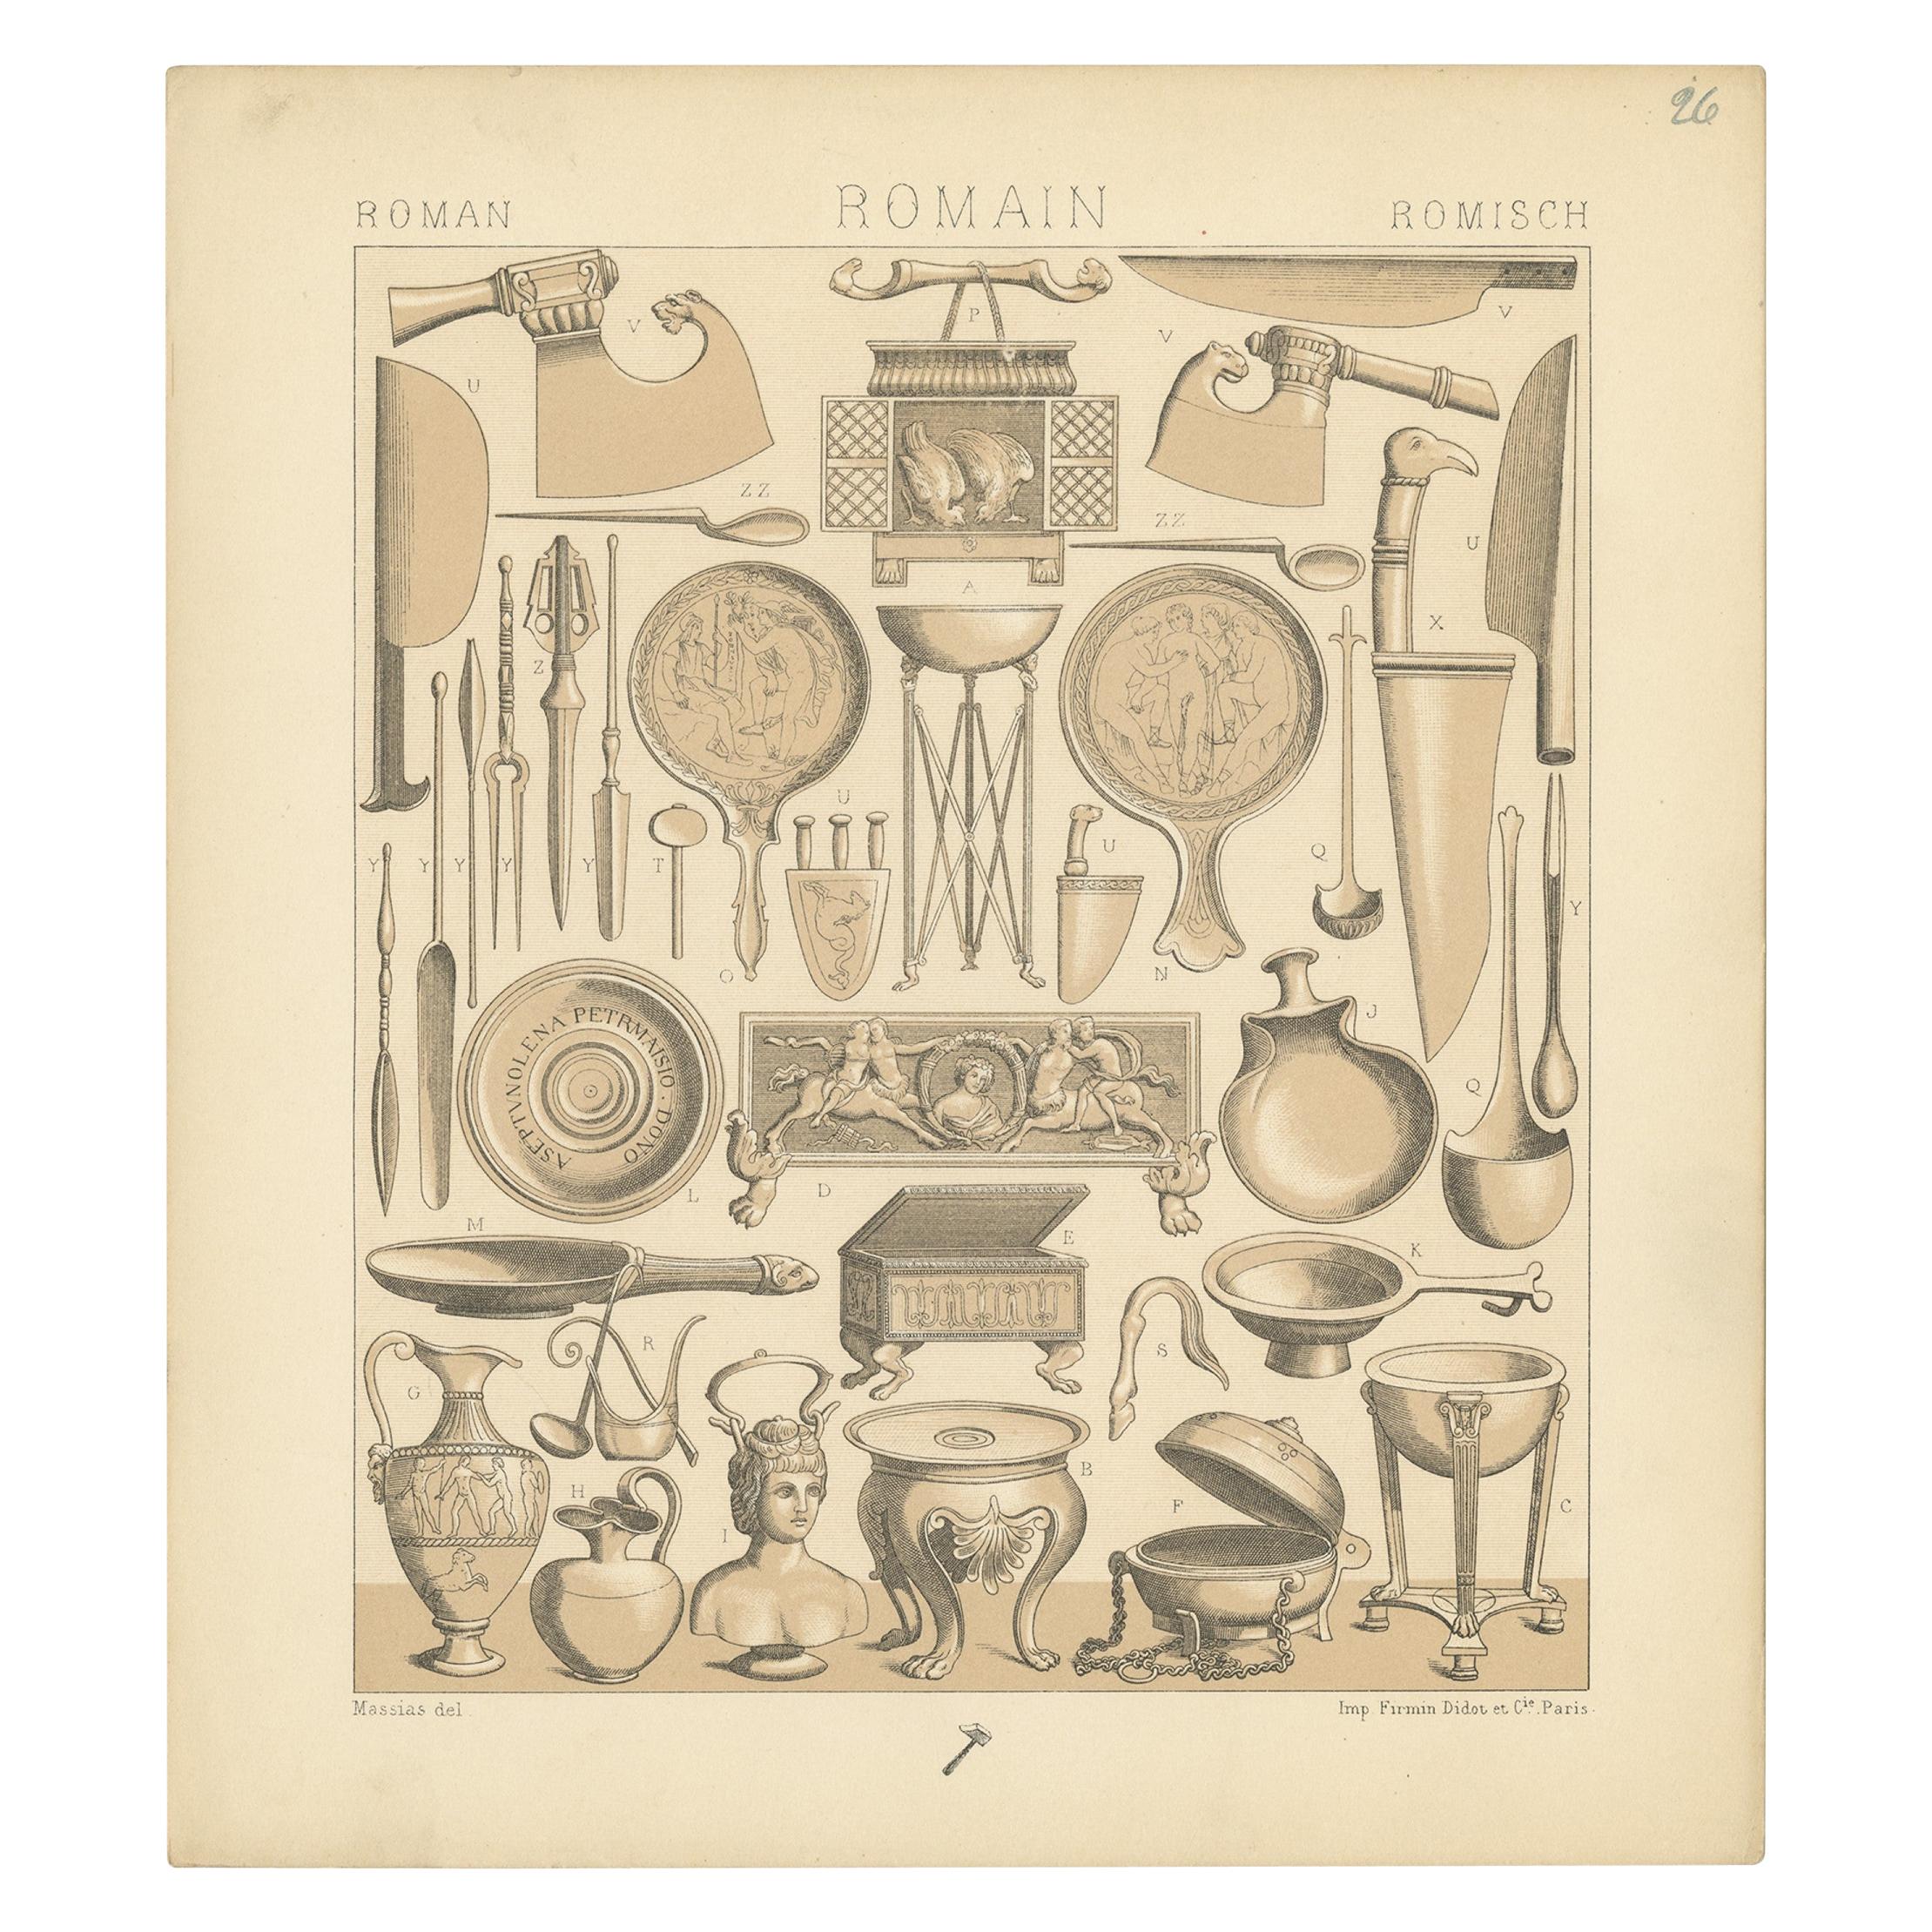 Pl. 26 Antique Print of Roman Decorative Objects by Racinet, 'circa 1880' For Sale